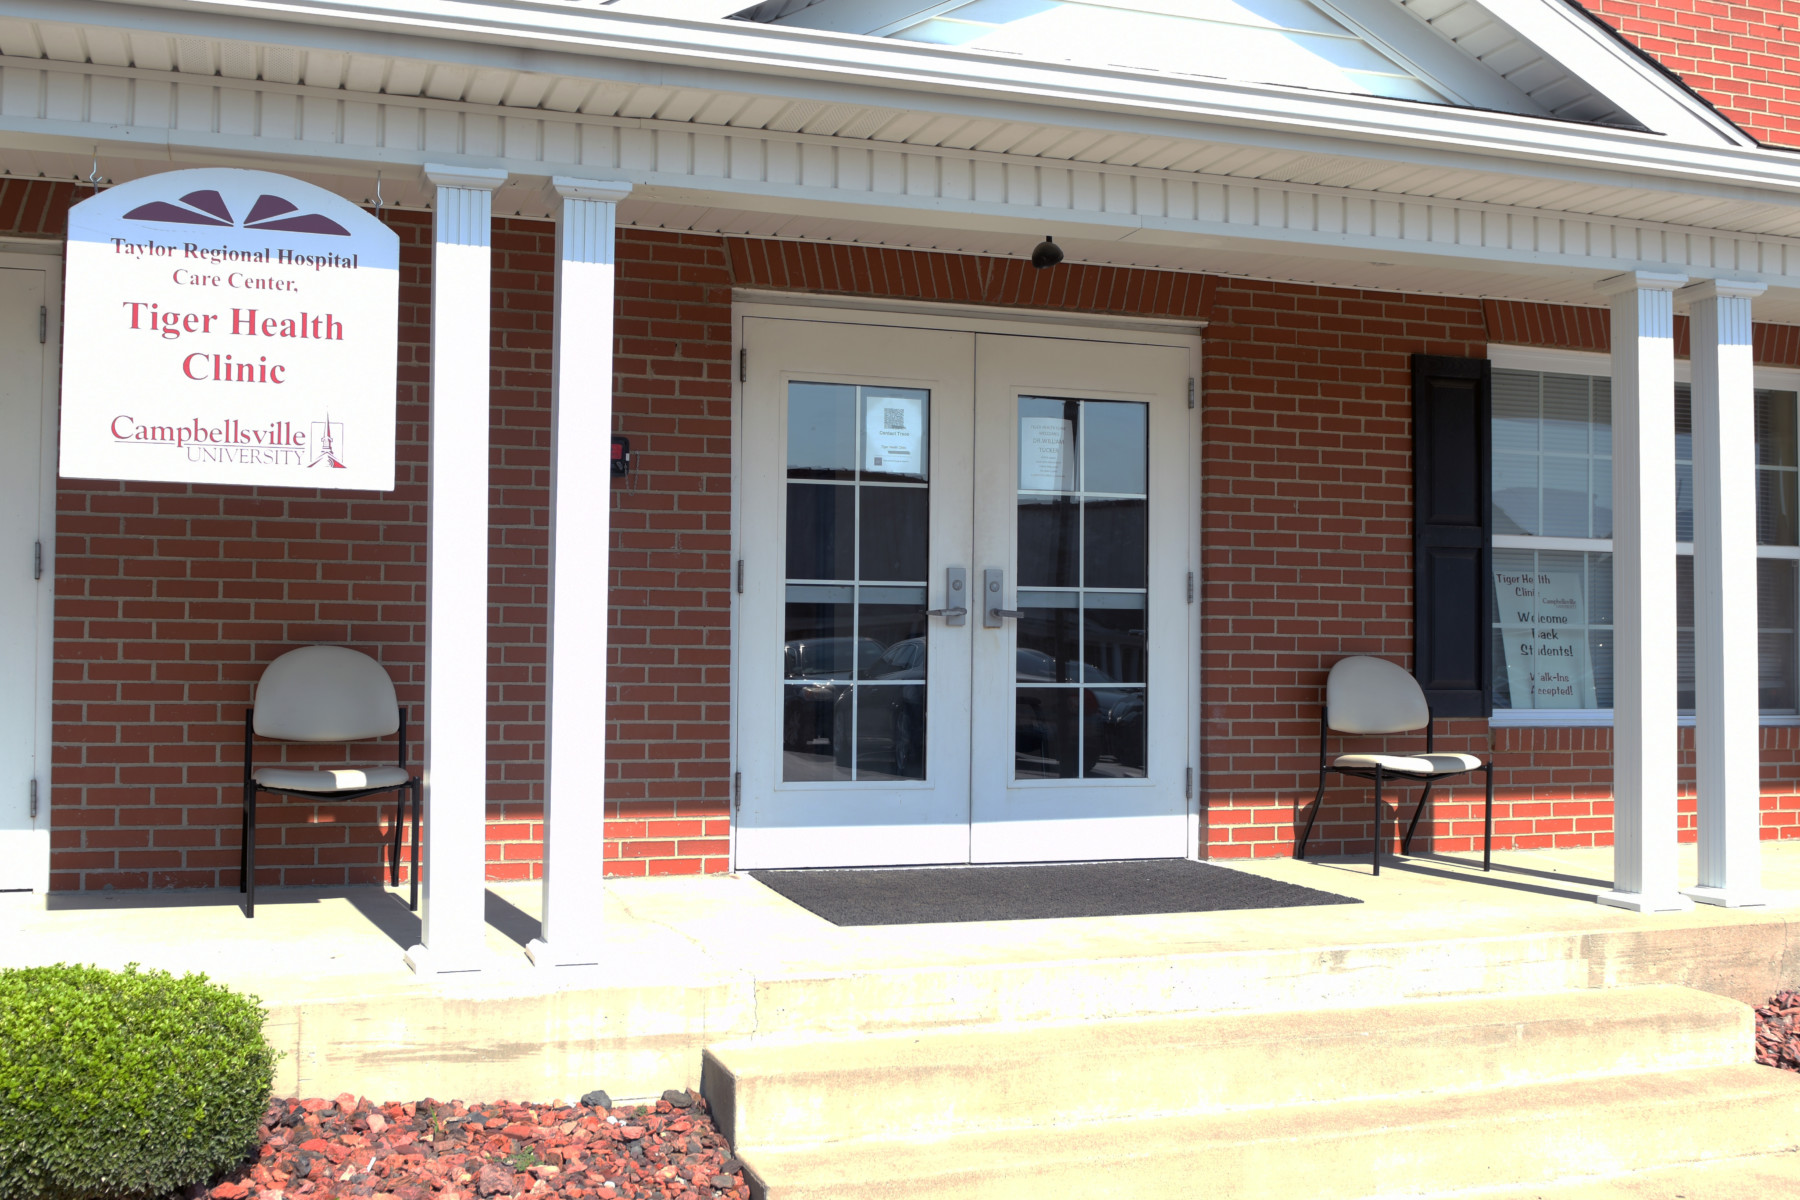 Tiger Health Clinic hires new doctor and moves to new location on Campbellsville University’s campus 1